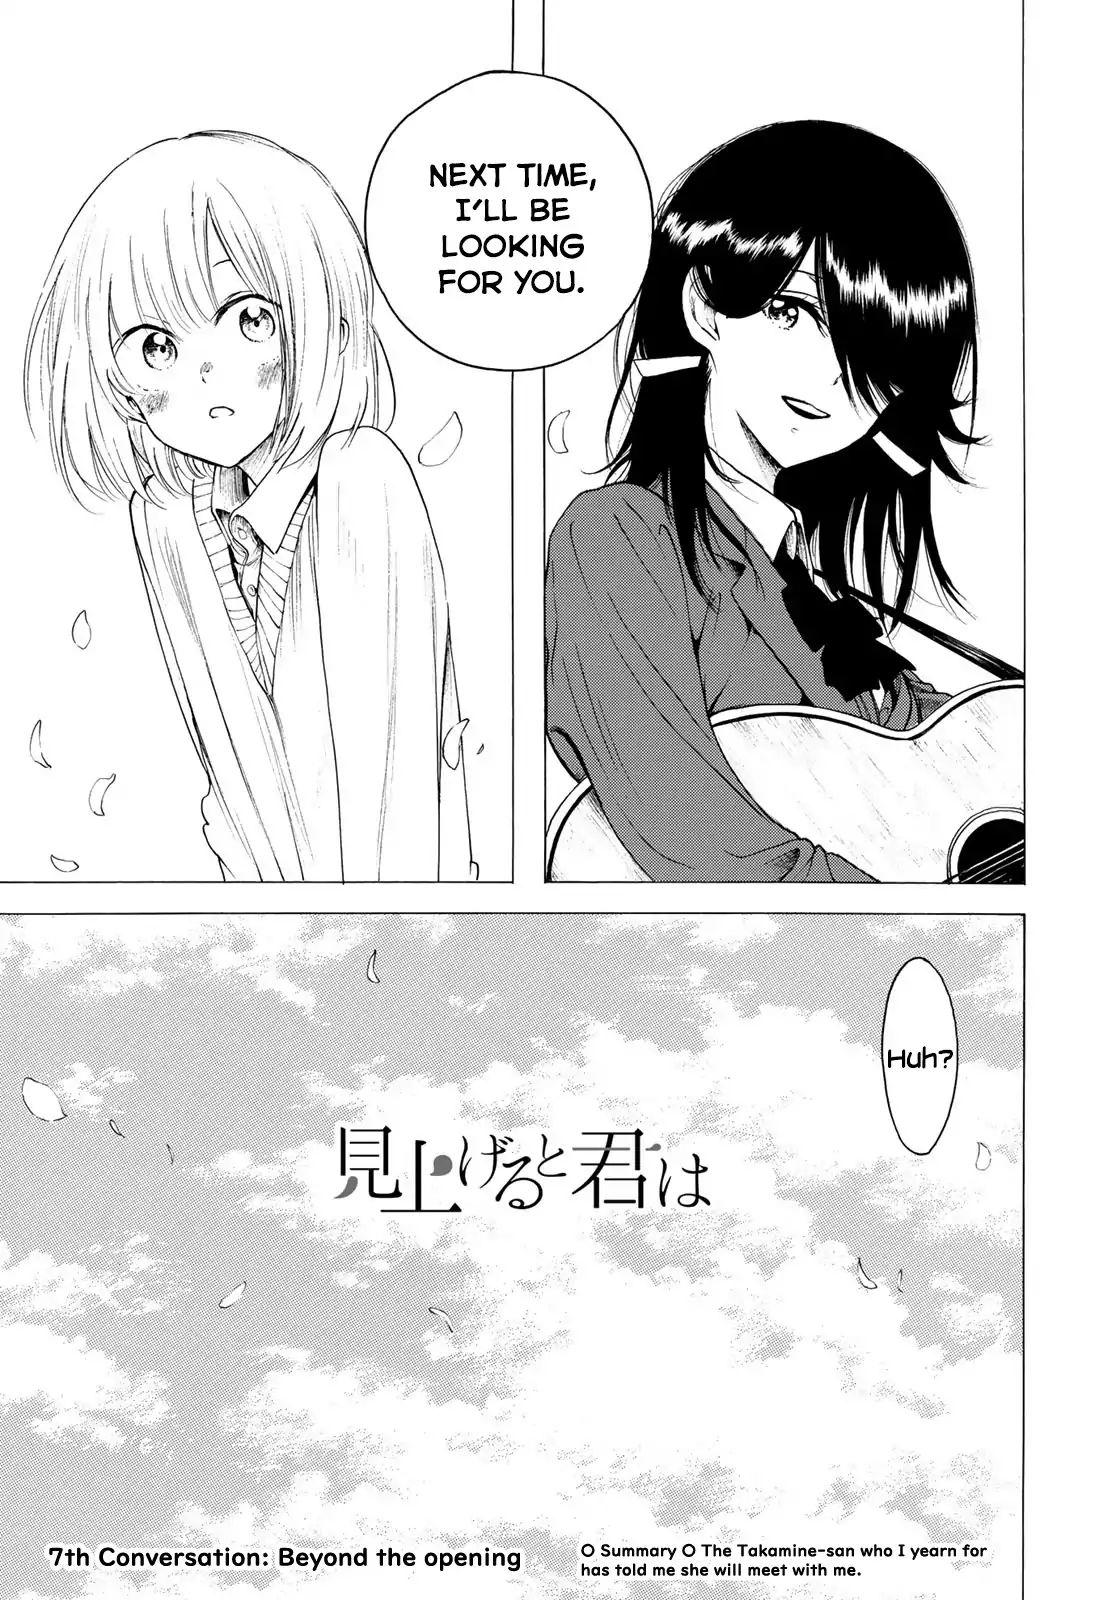 Looking Up To You Manga Read Looking Up To You Vol.1 Chapter 7: Beyond The Opening on Mangakakalot